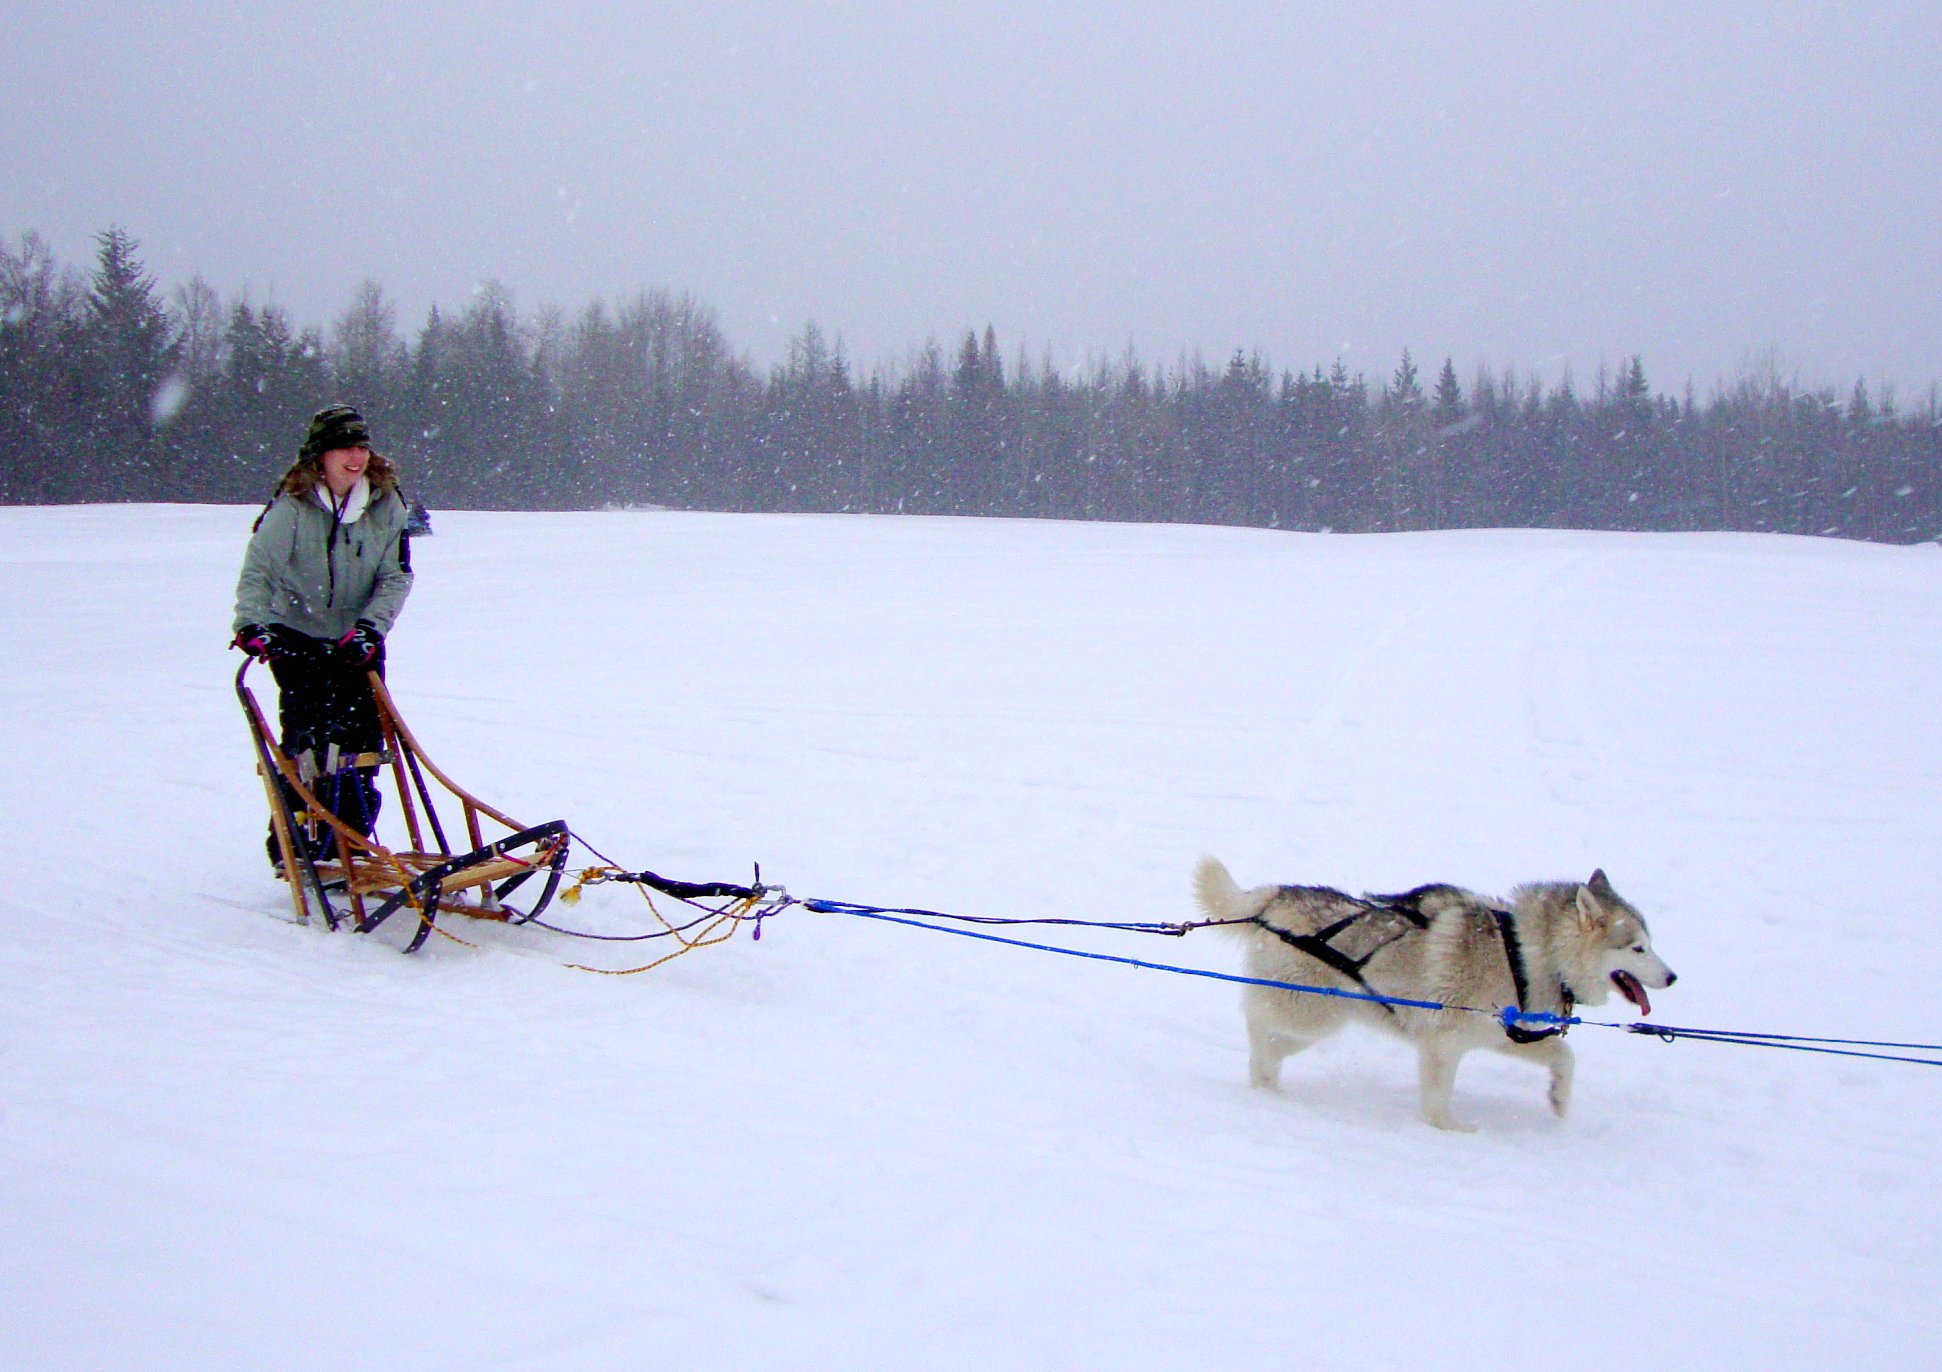 there is a woman riding in a sled with two dogs